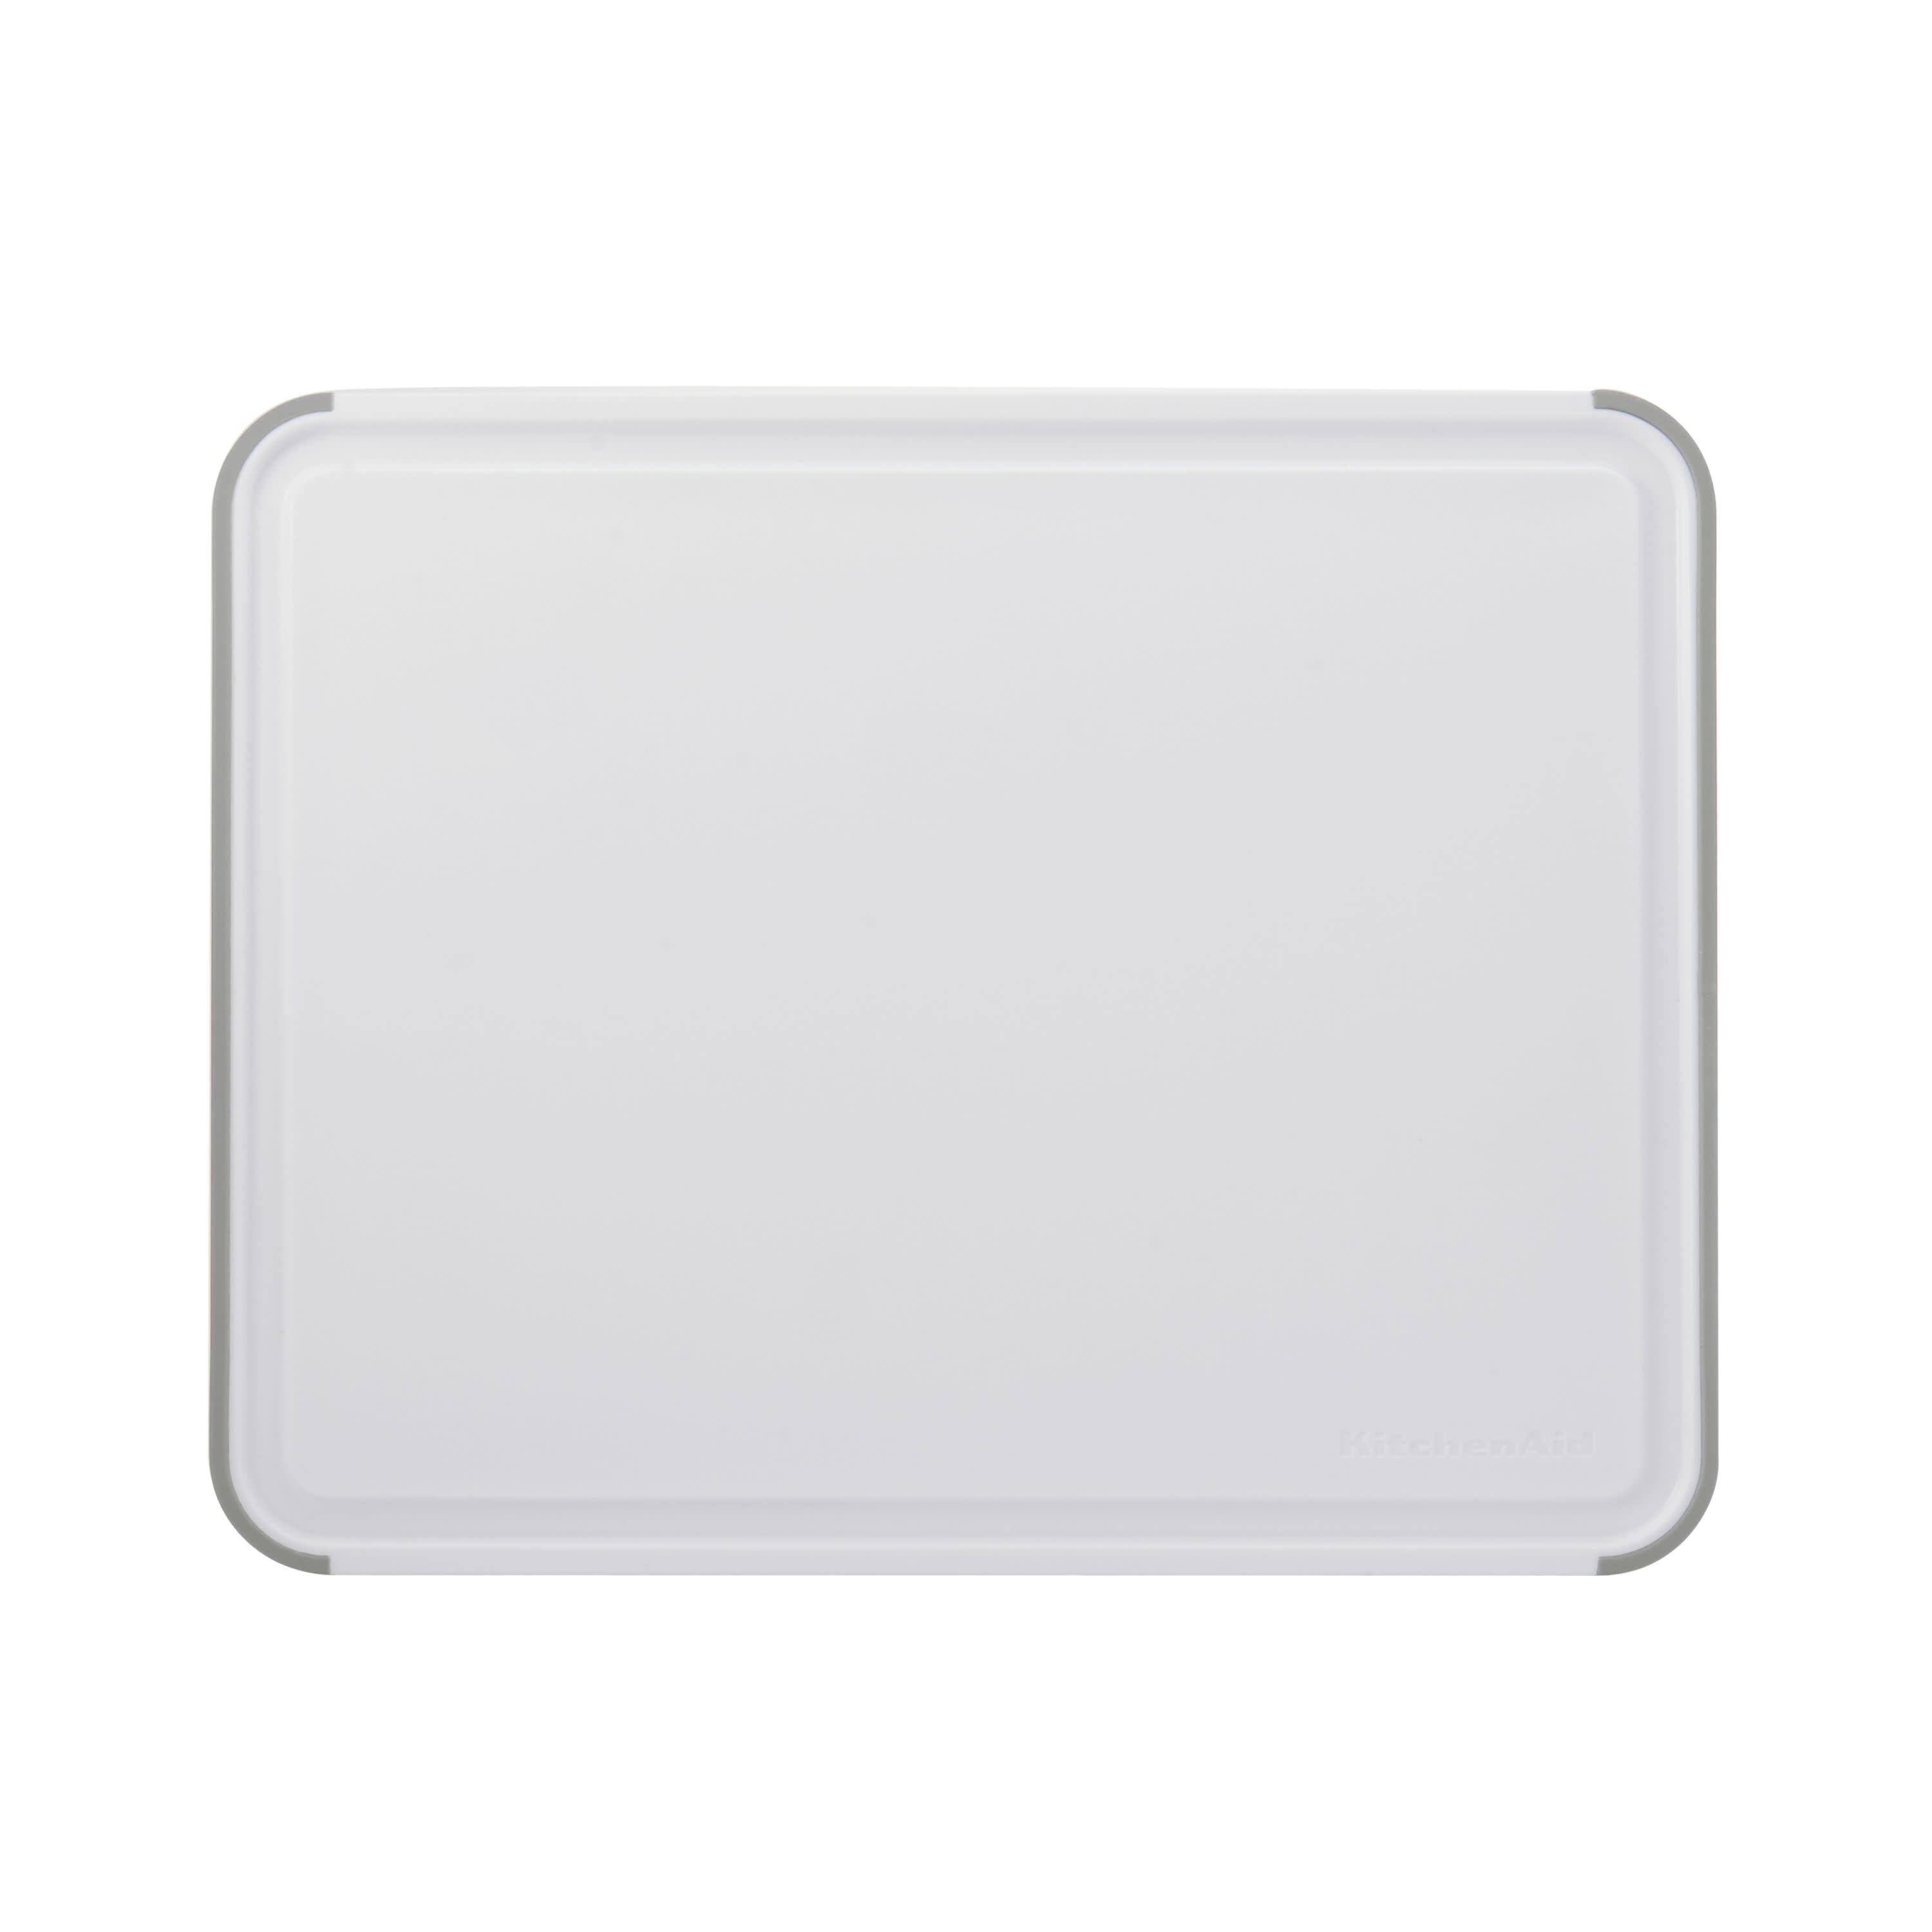 11-inch By 14-inch White Poly Cutting Board, BPA-free